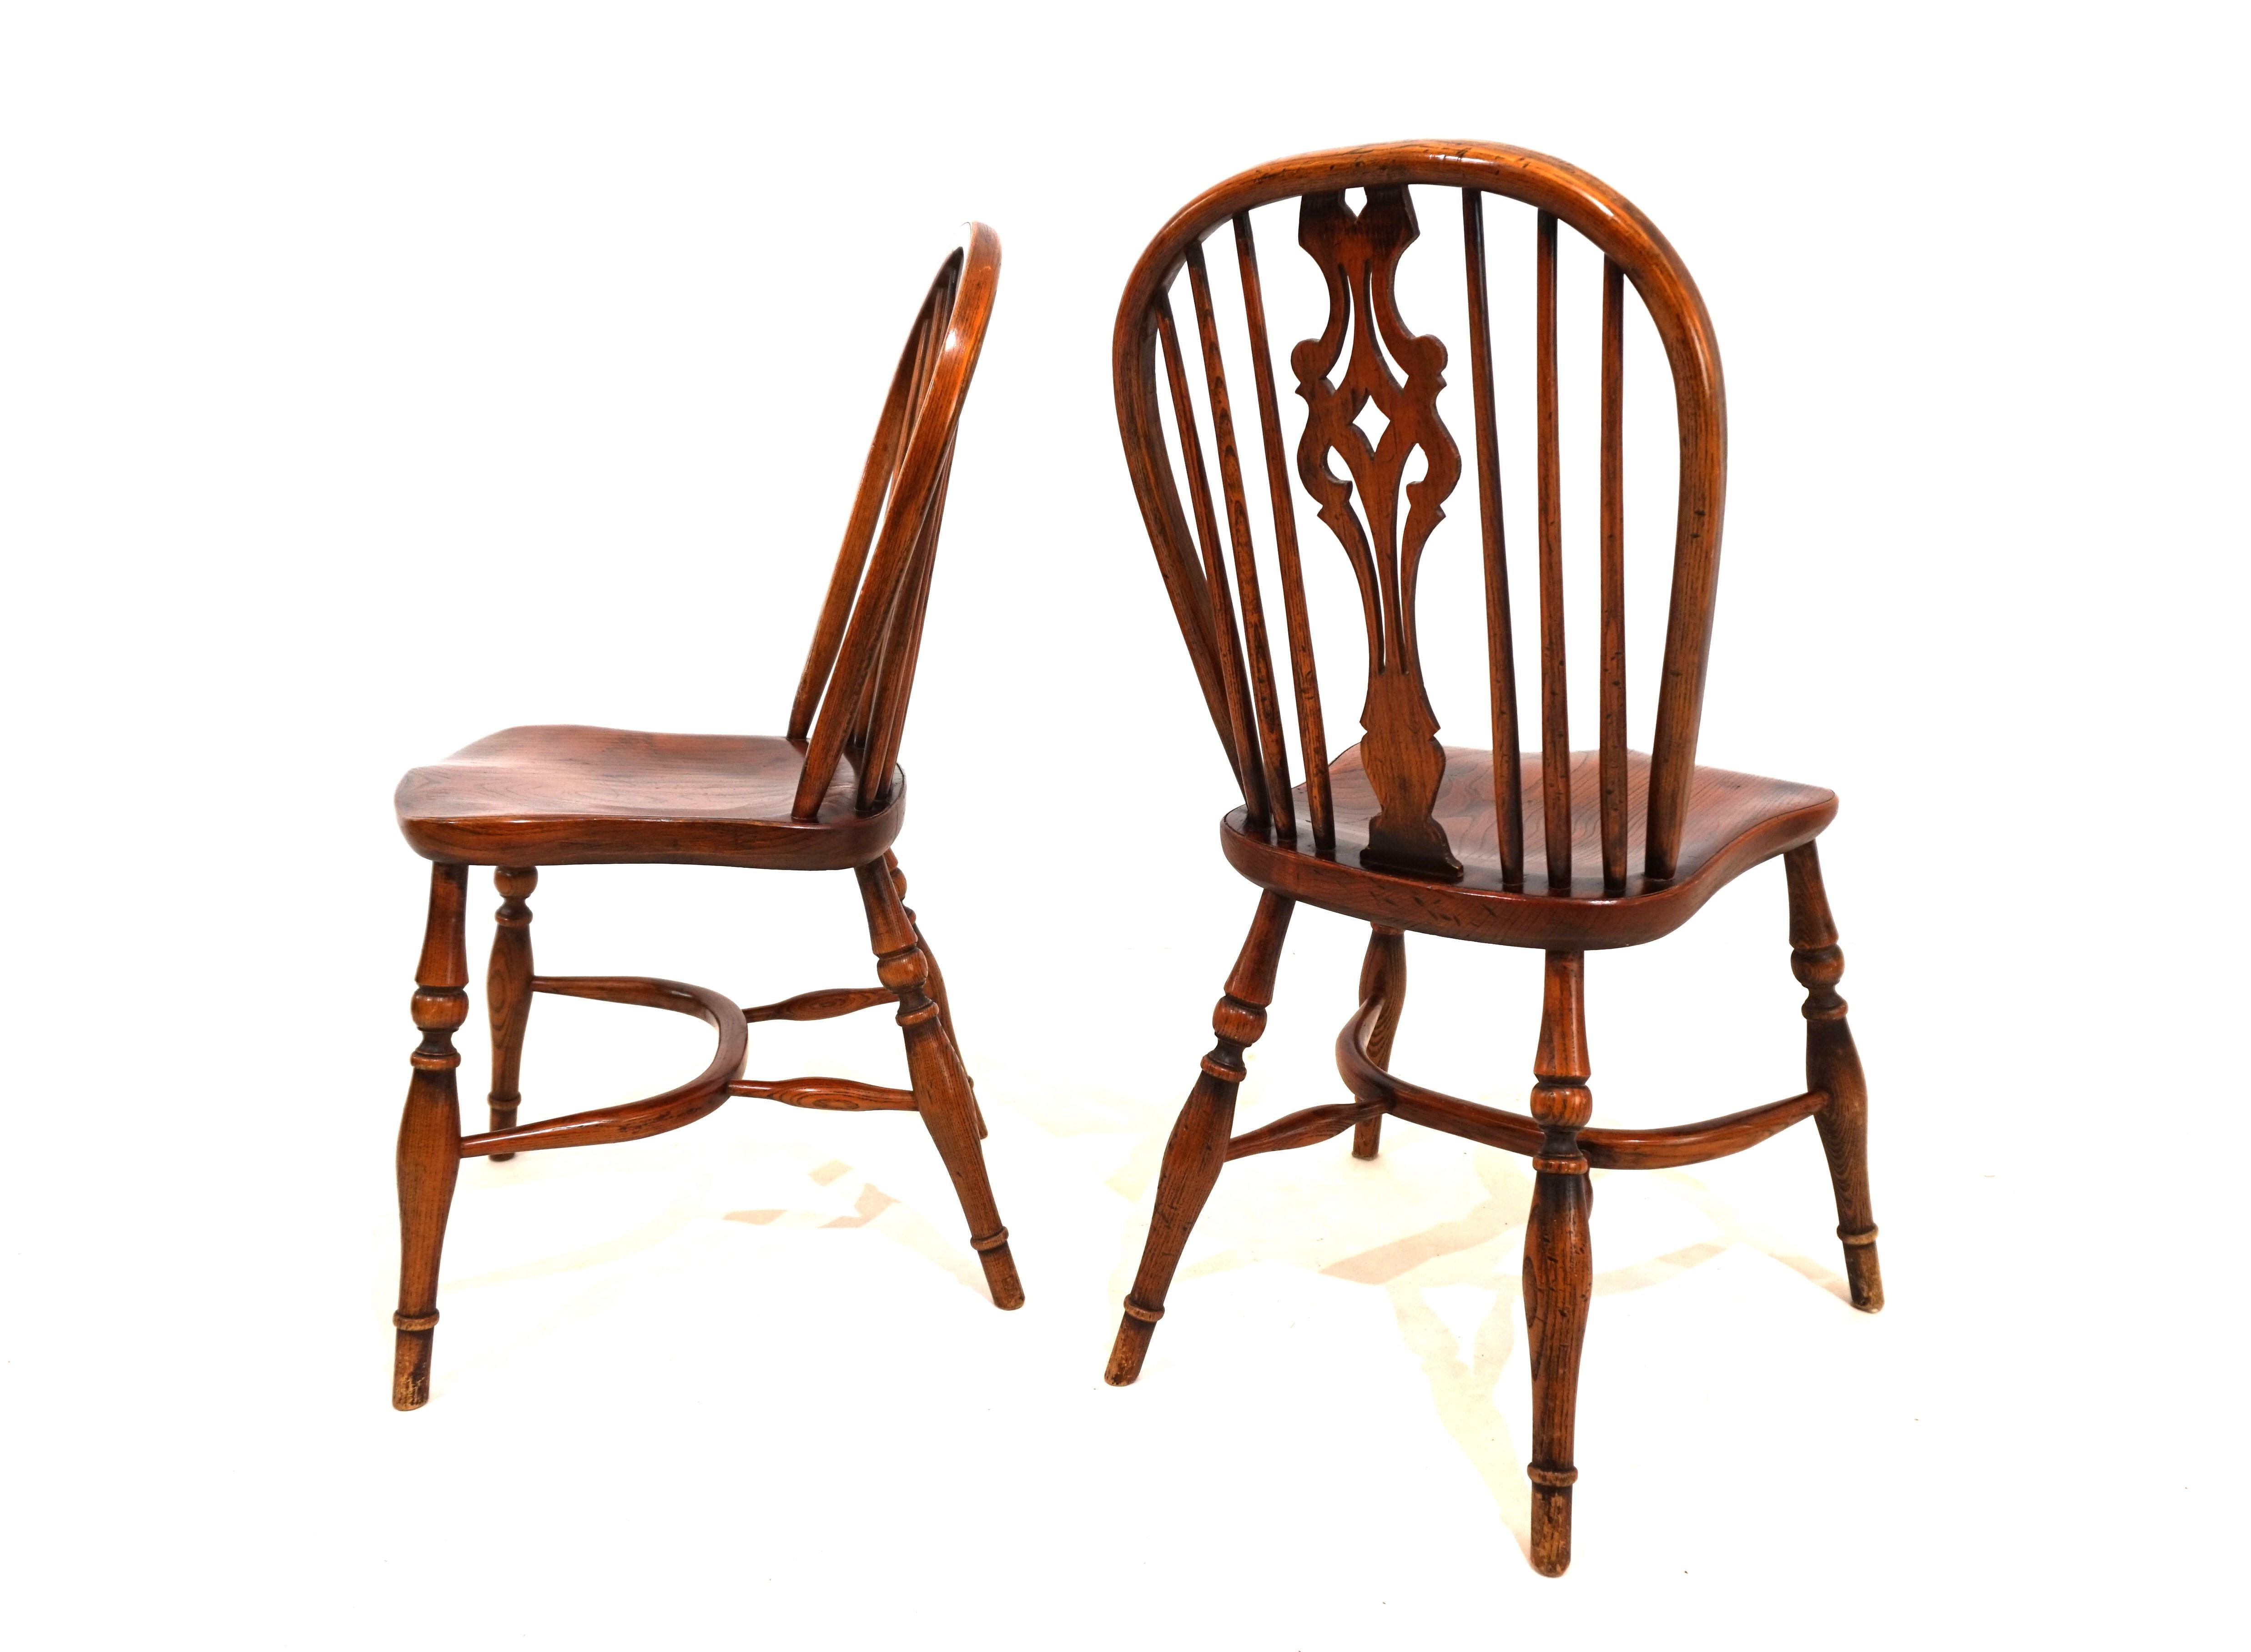 The pair of 2 classic Windsor chairs without armrests are in very good condition with a beautiful patina of age. The chairs have an attractive design element on the backrest and are solidly crafted. Over the years, they have developed signs of wear